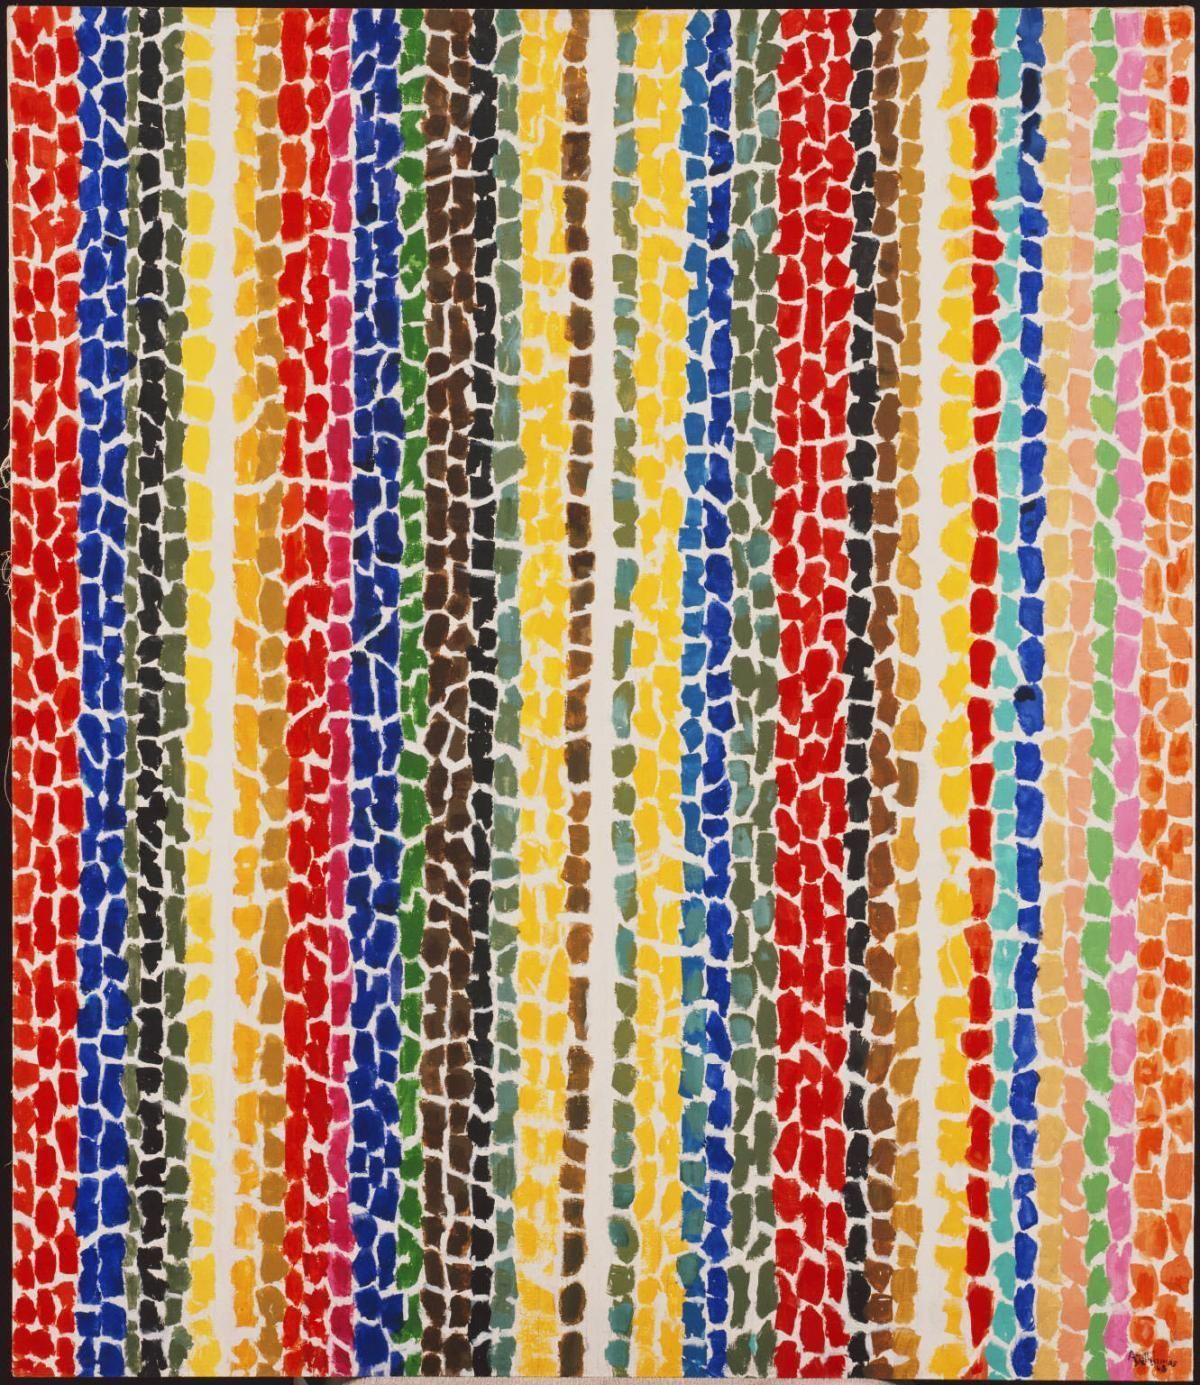 Frist Art Museum showcases beauty through life and works of Alma Thomas